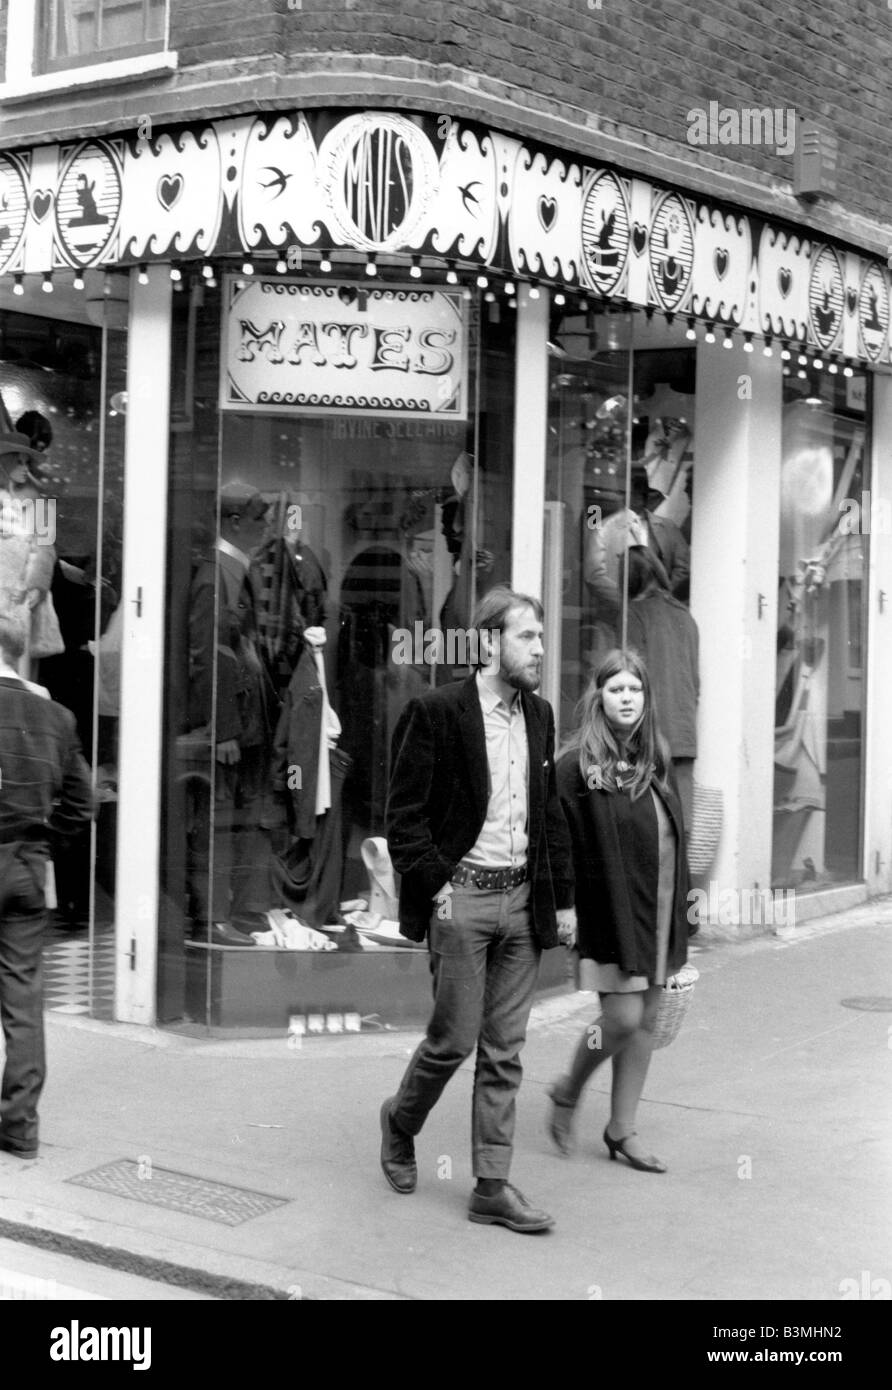 CARNABY STREET London in 1965 - the Mates boutique Stock Photo - Alamy